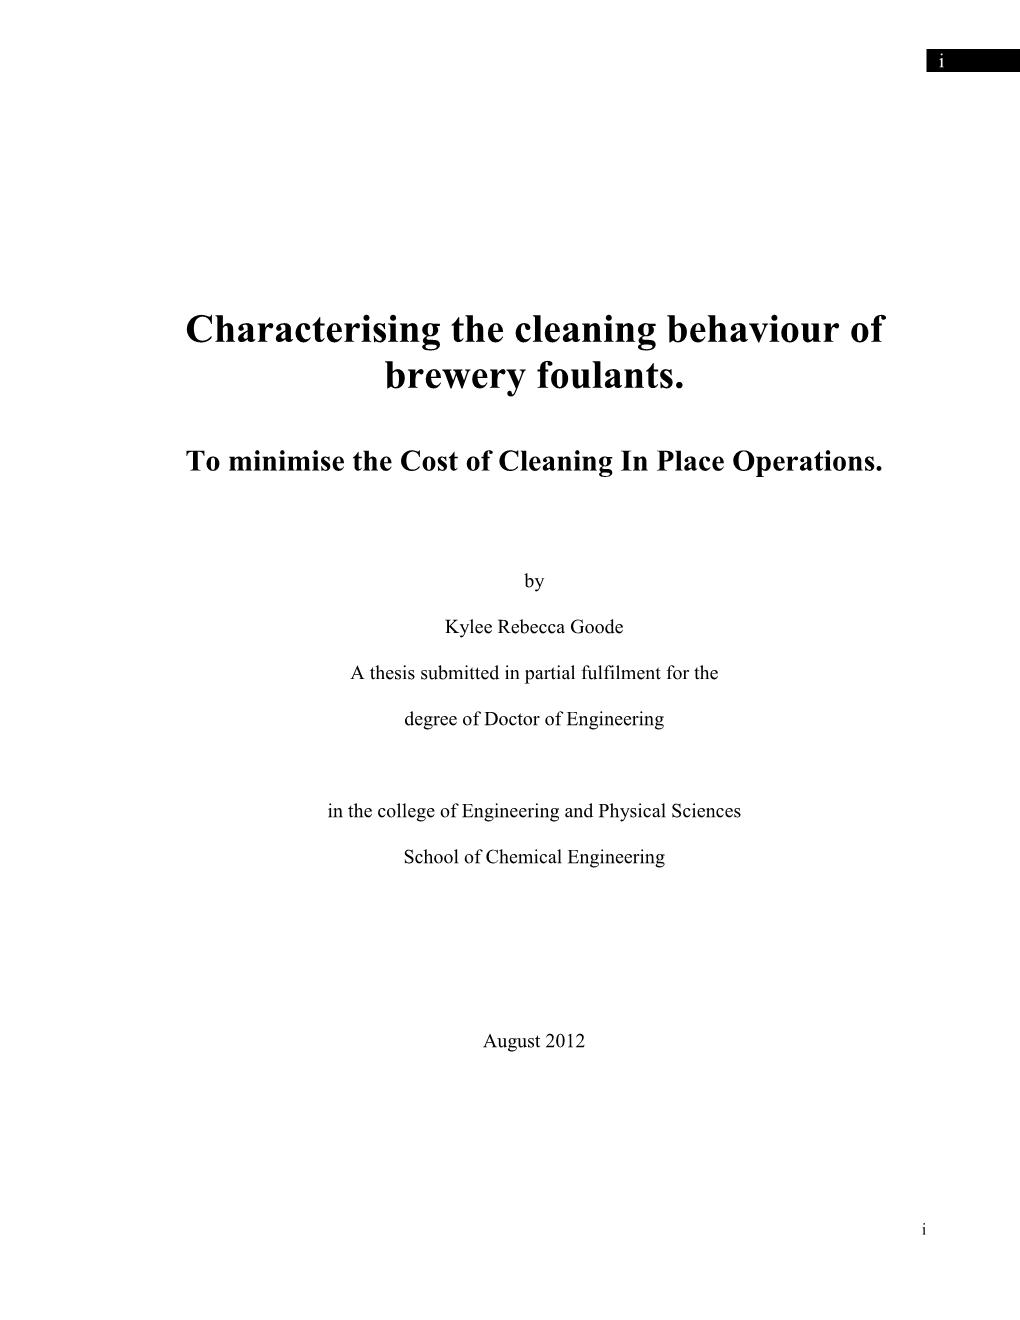 Characterising the Cleaning Behaviour of Brewery Foulants